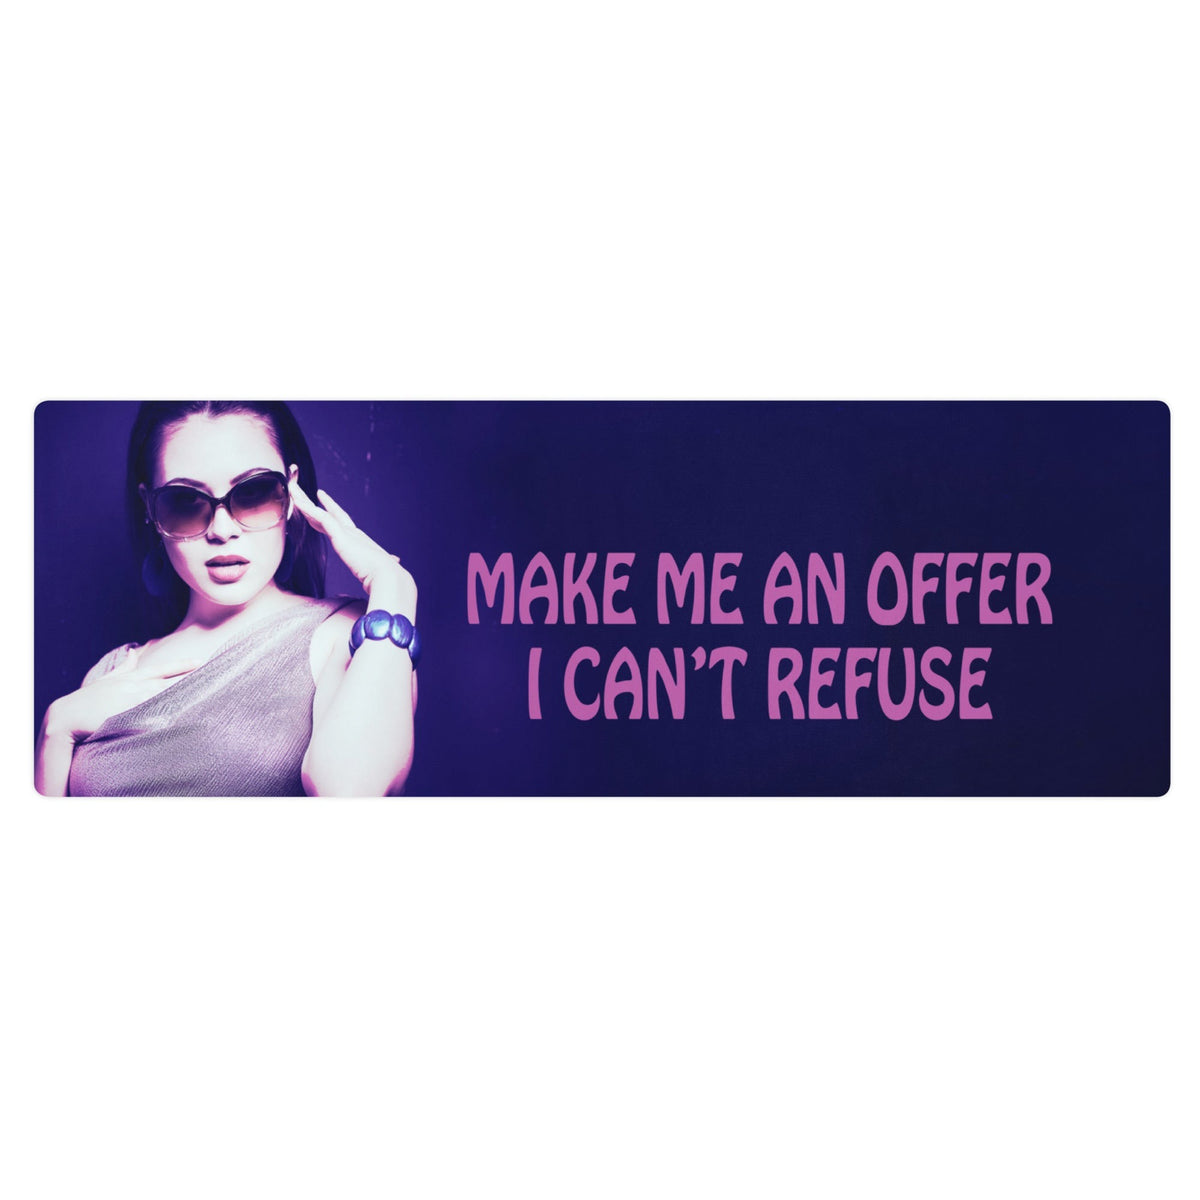 Yoga mat with a purple wrap and an image of a young woman in sunglasses. There is pink text that reads Make Me An Offer I Can't Refuse